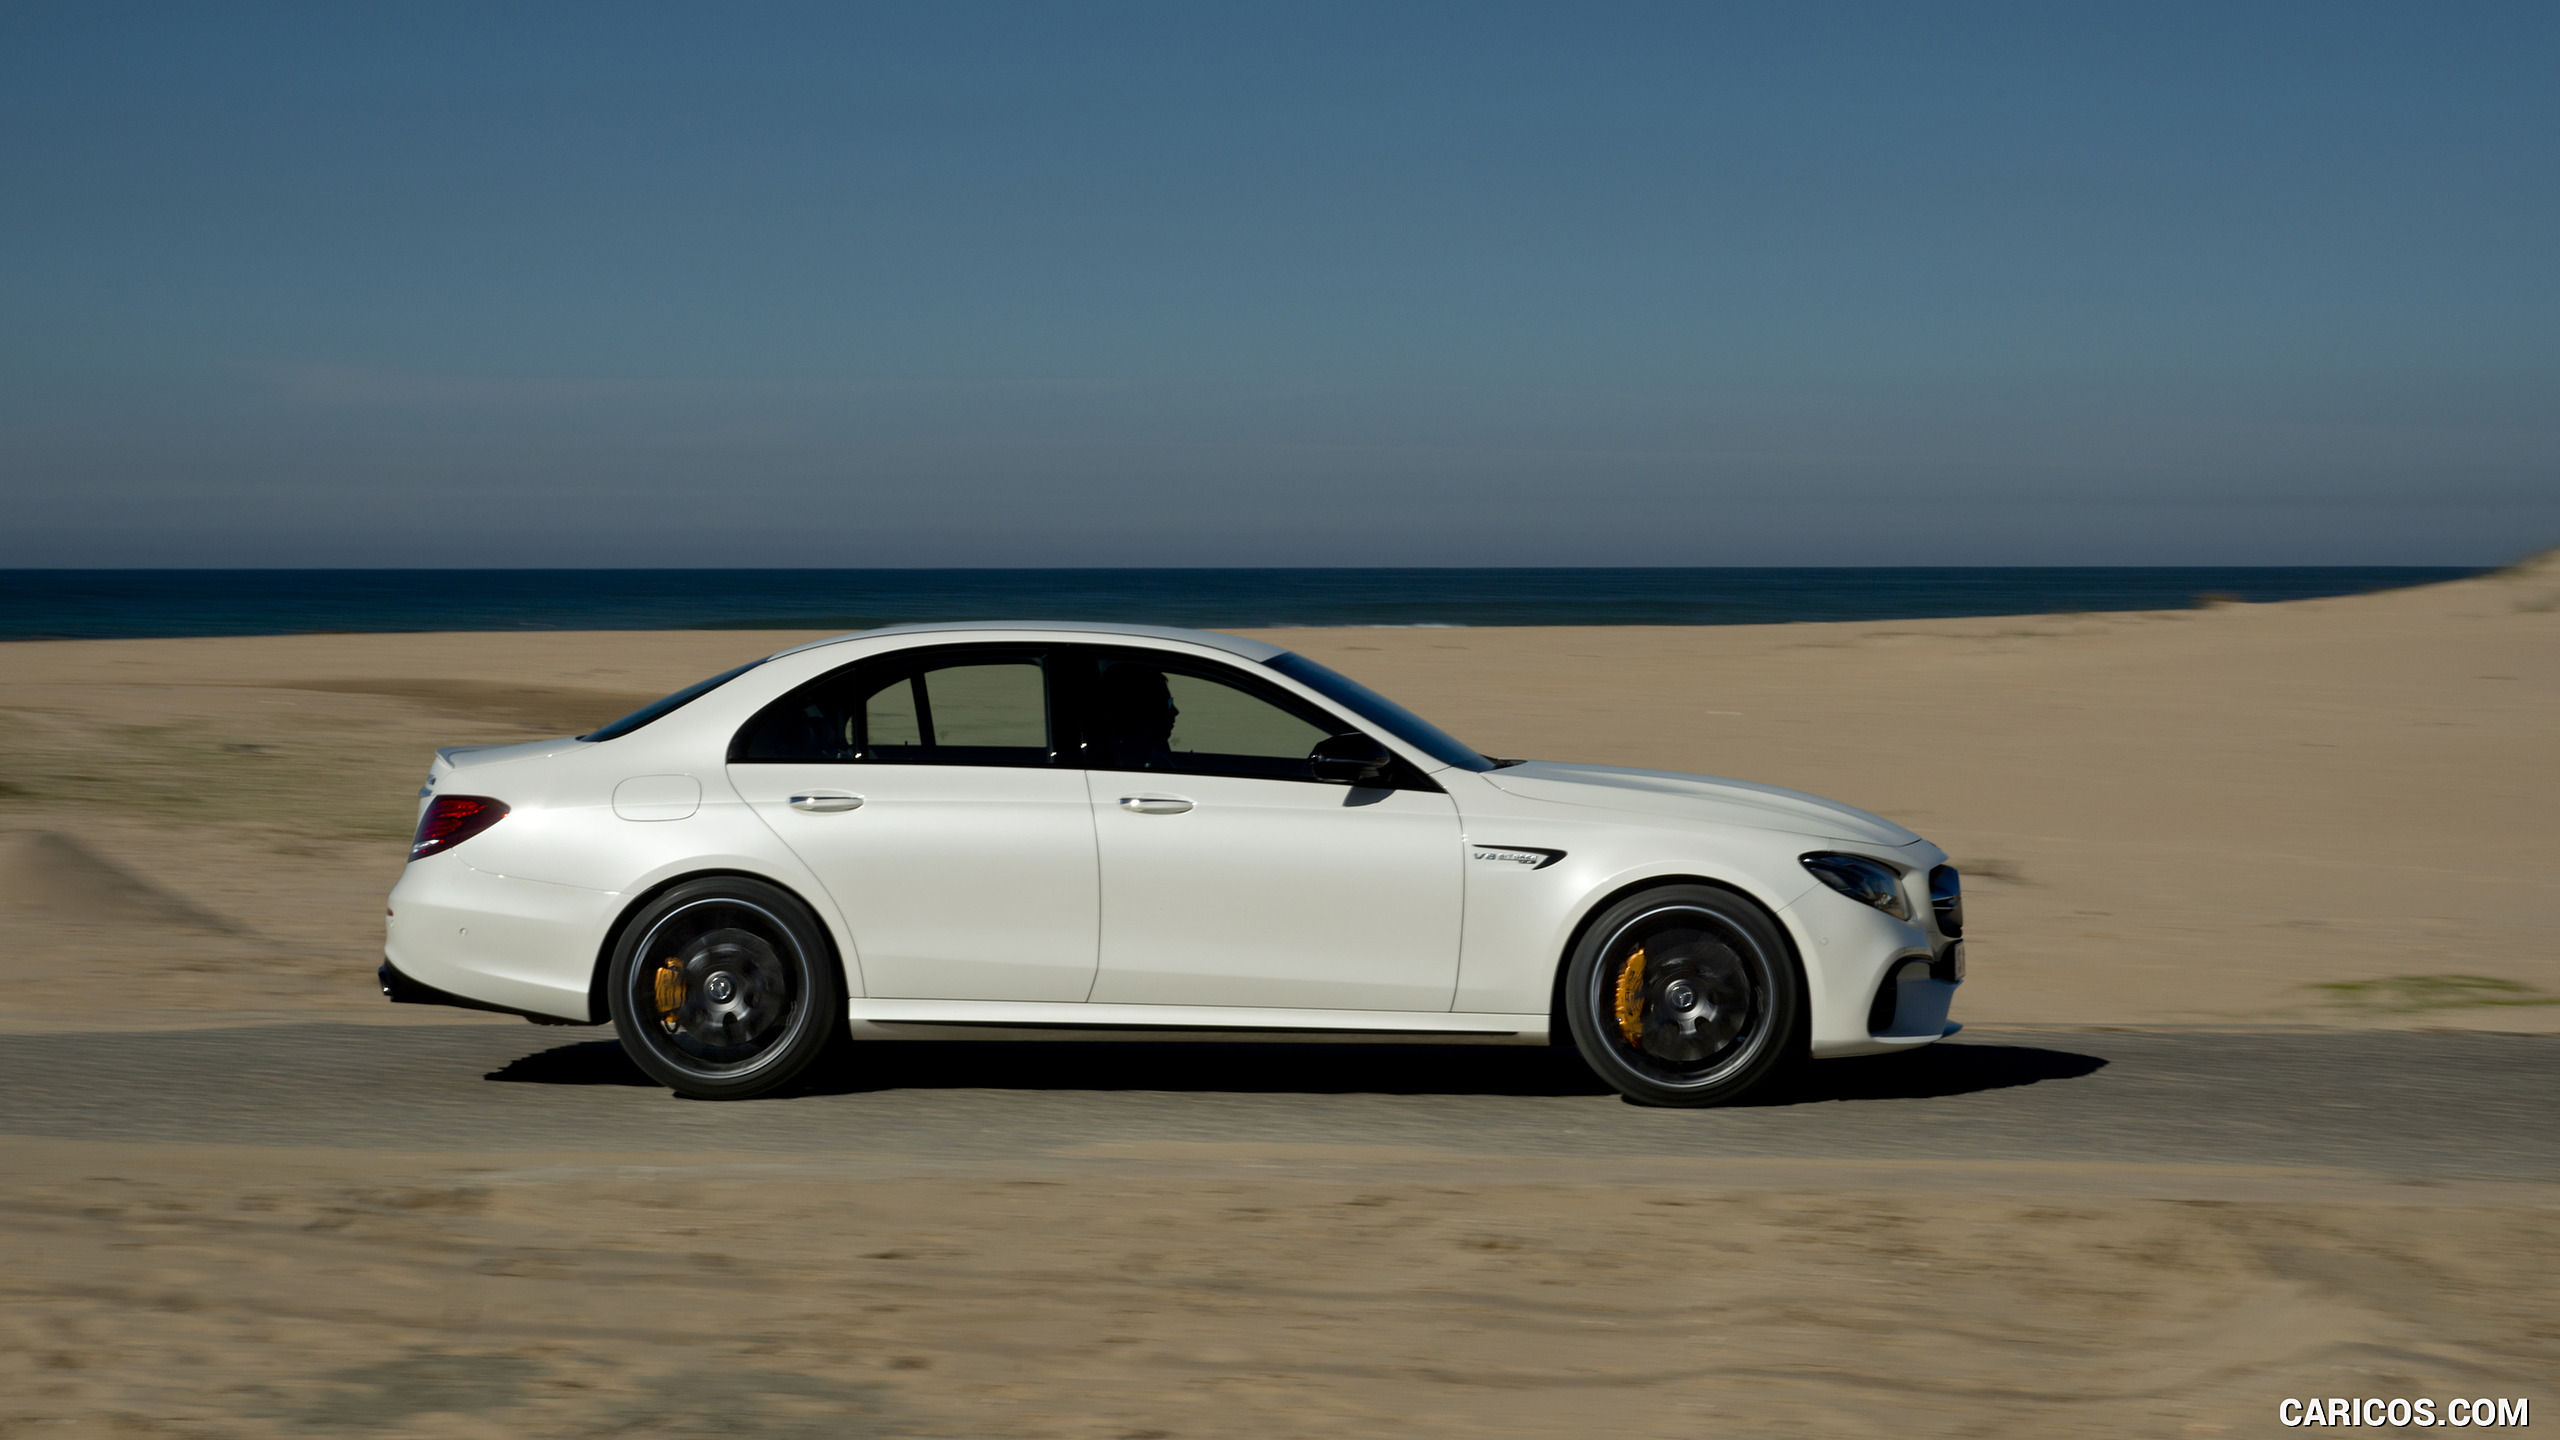 2018 Mercedes-AMG E63 S 4MATIC+ - Side, #57 of 323